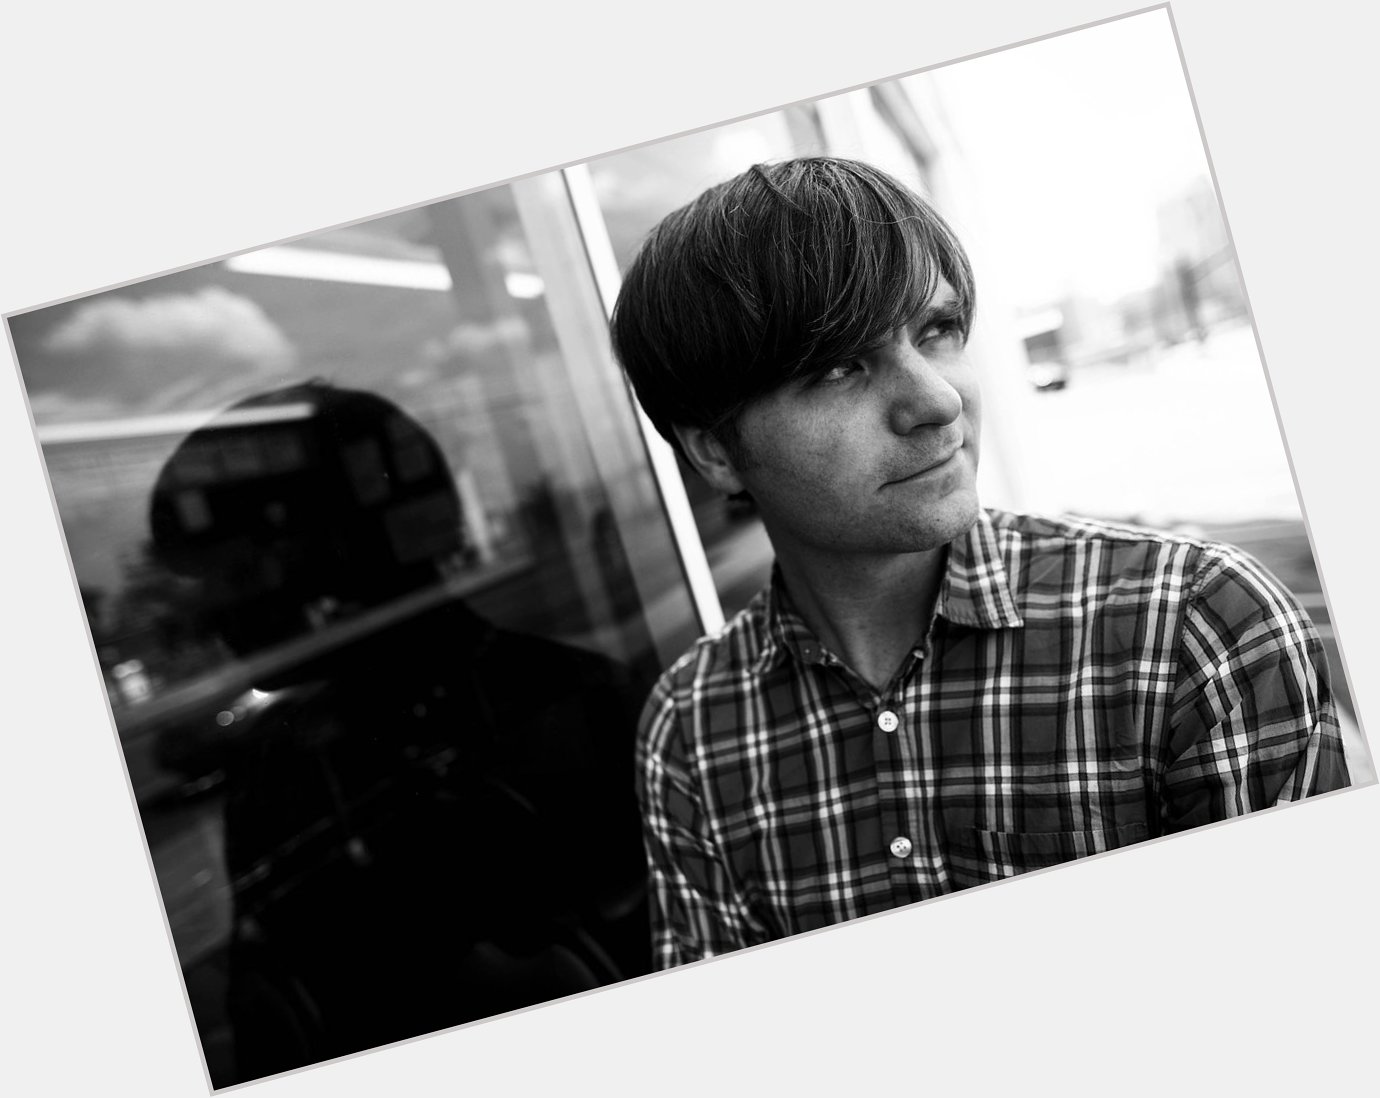 His soul met body today in \76. Happy Birthday, Ben Gibbard! Death Cab For Cutie on the turntable @ Noon 